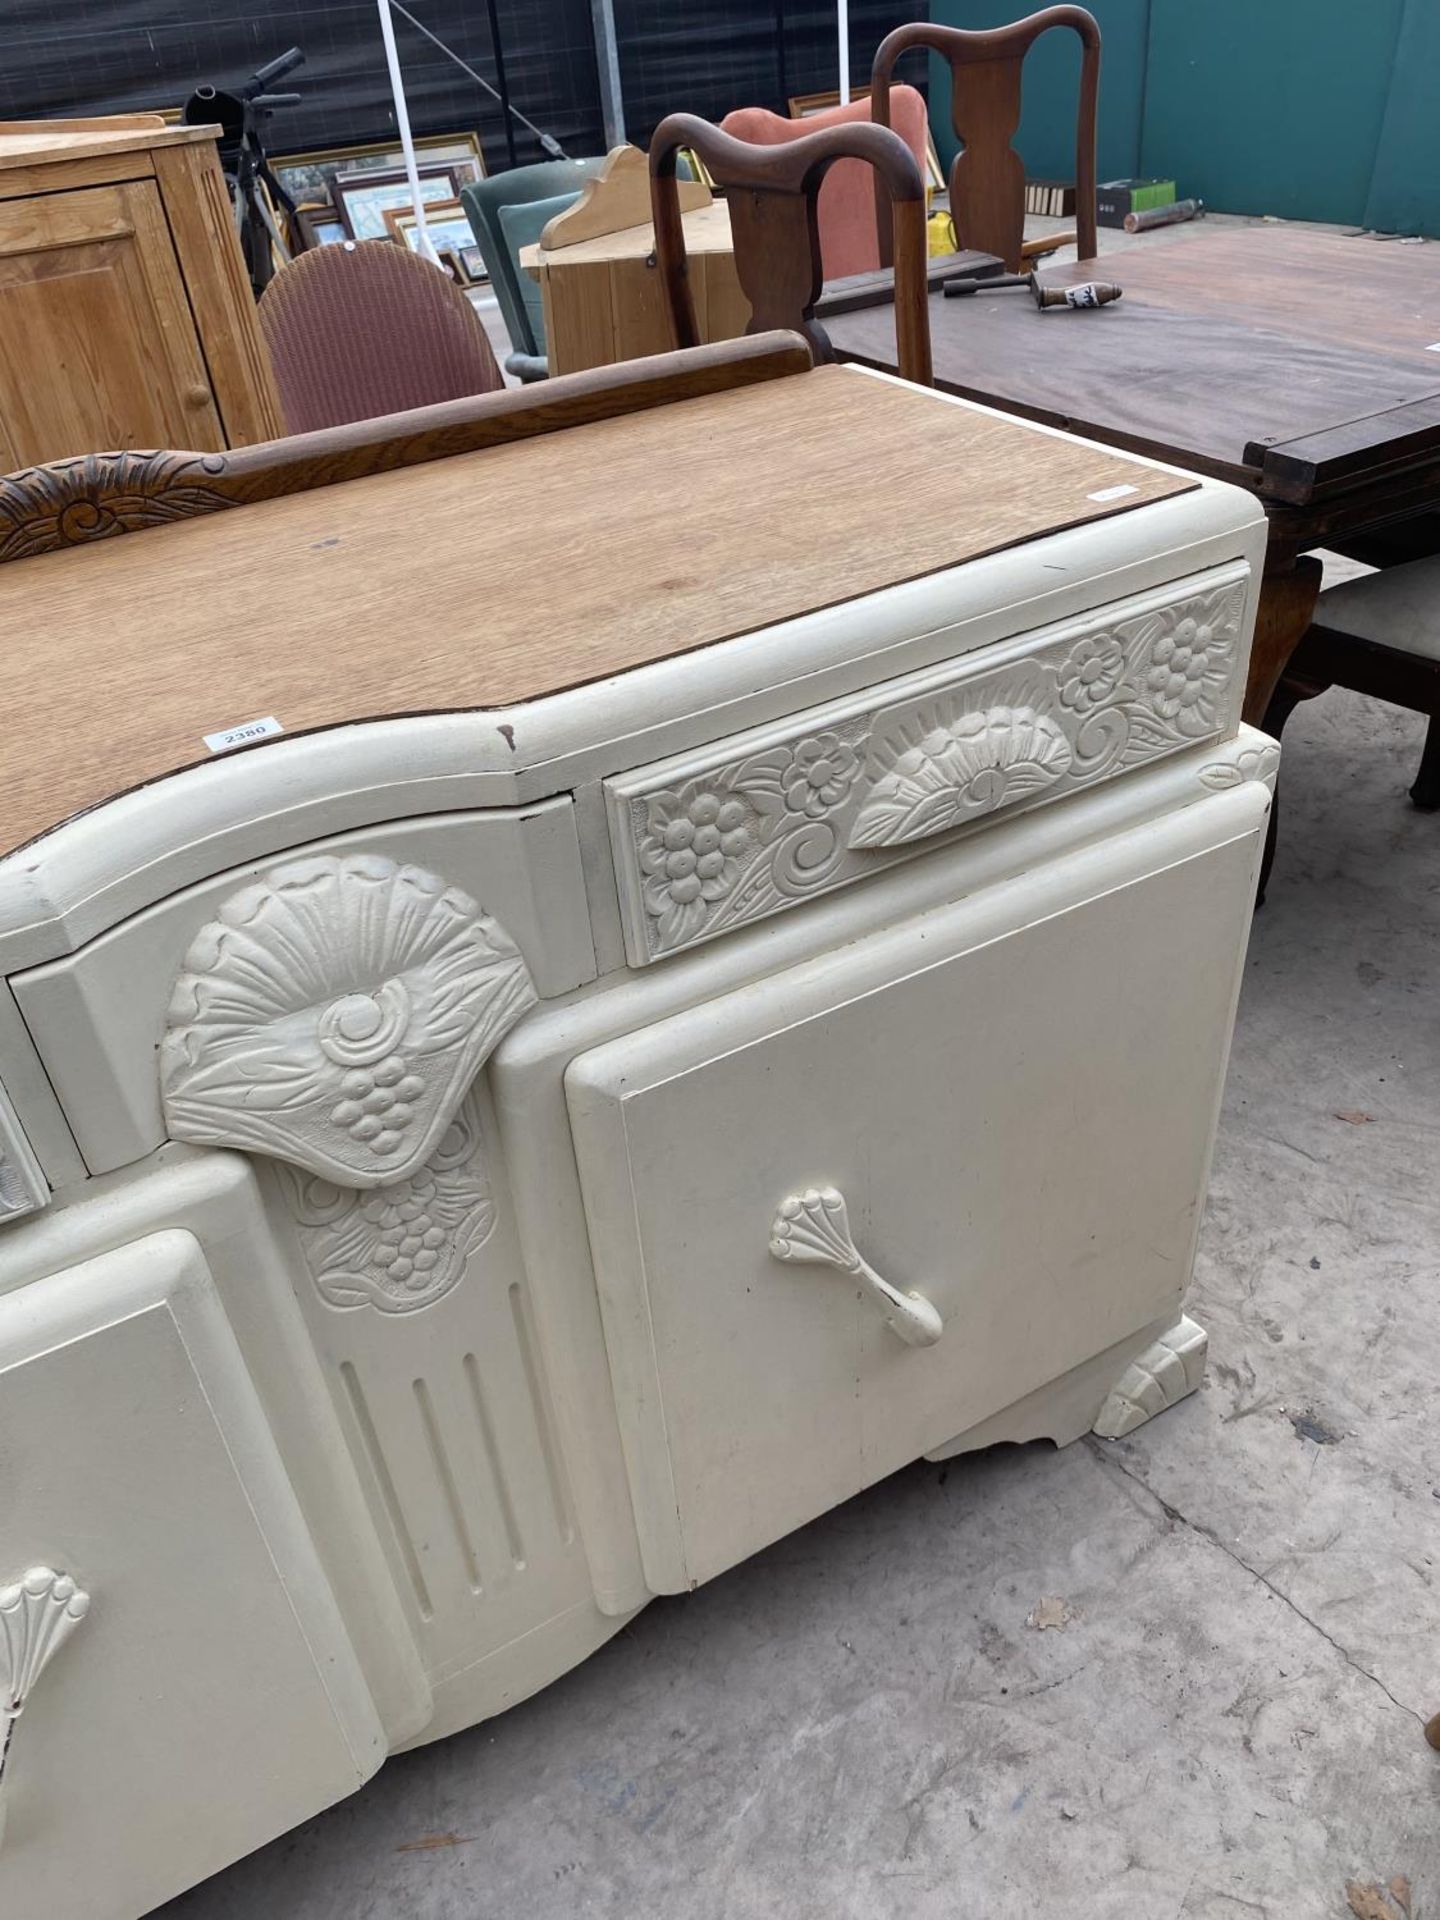 AN EARLY 20TH CENTURY OAK SIDEBOARD WITH SHABBY CHIC PAINTING, 54" WIDE - Image 3 of 4